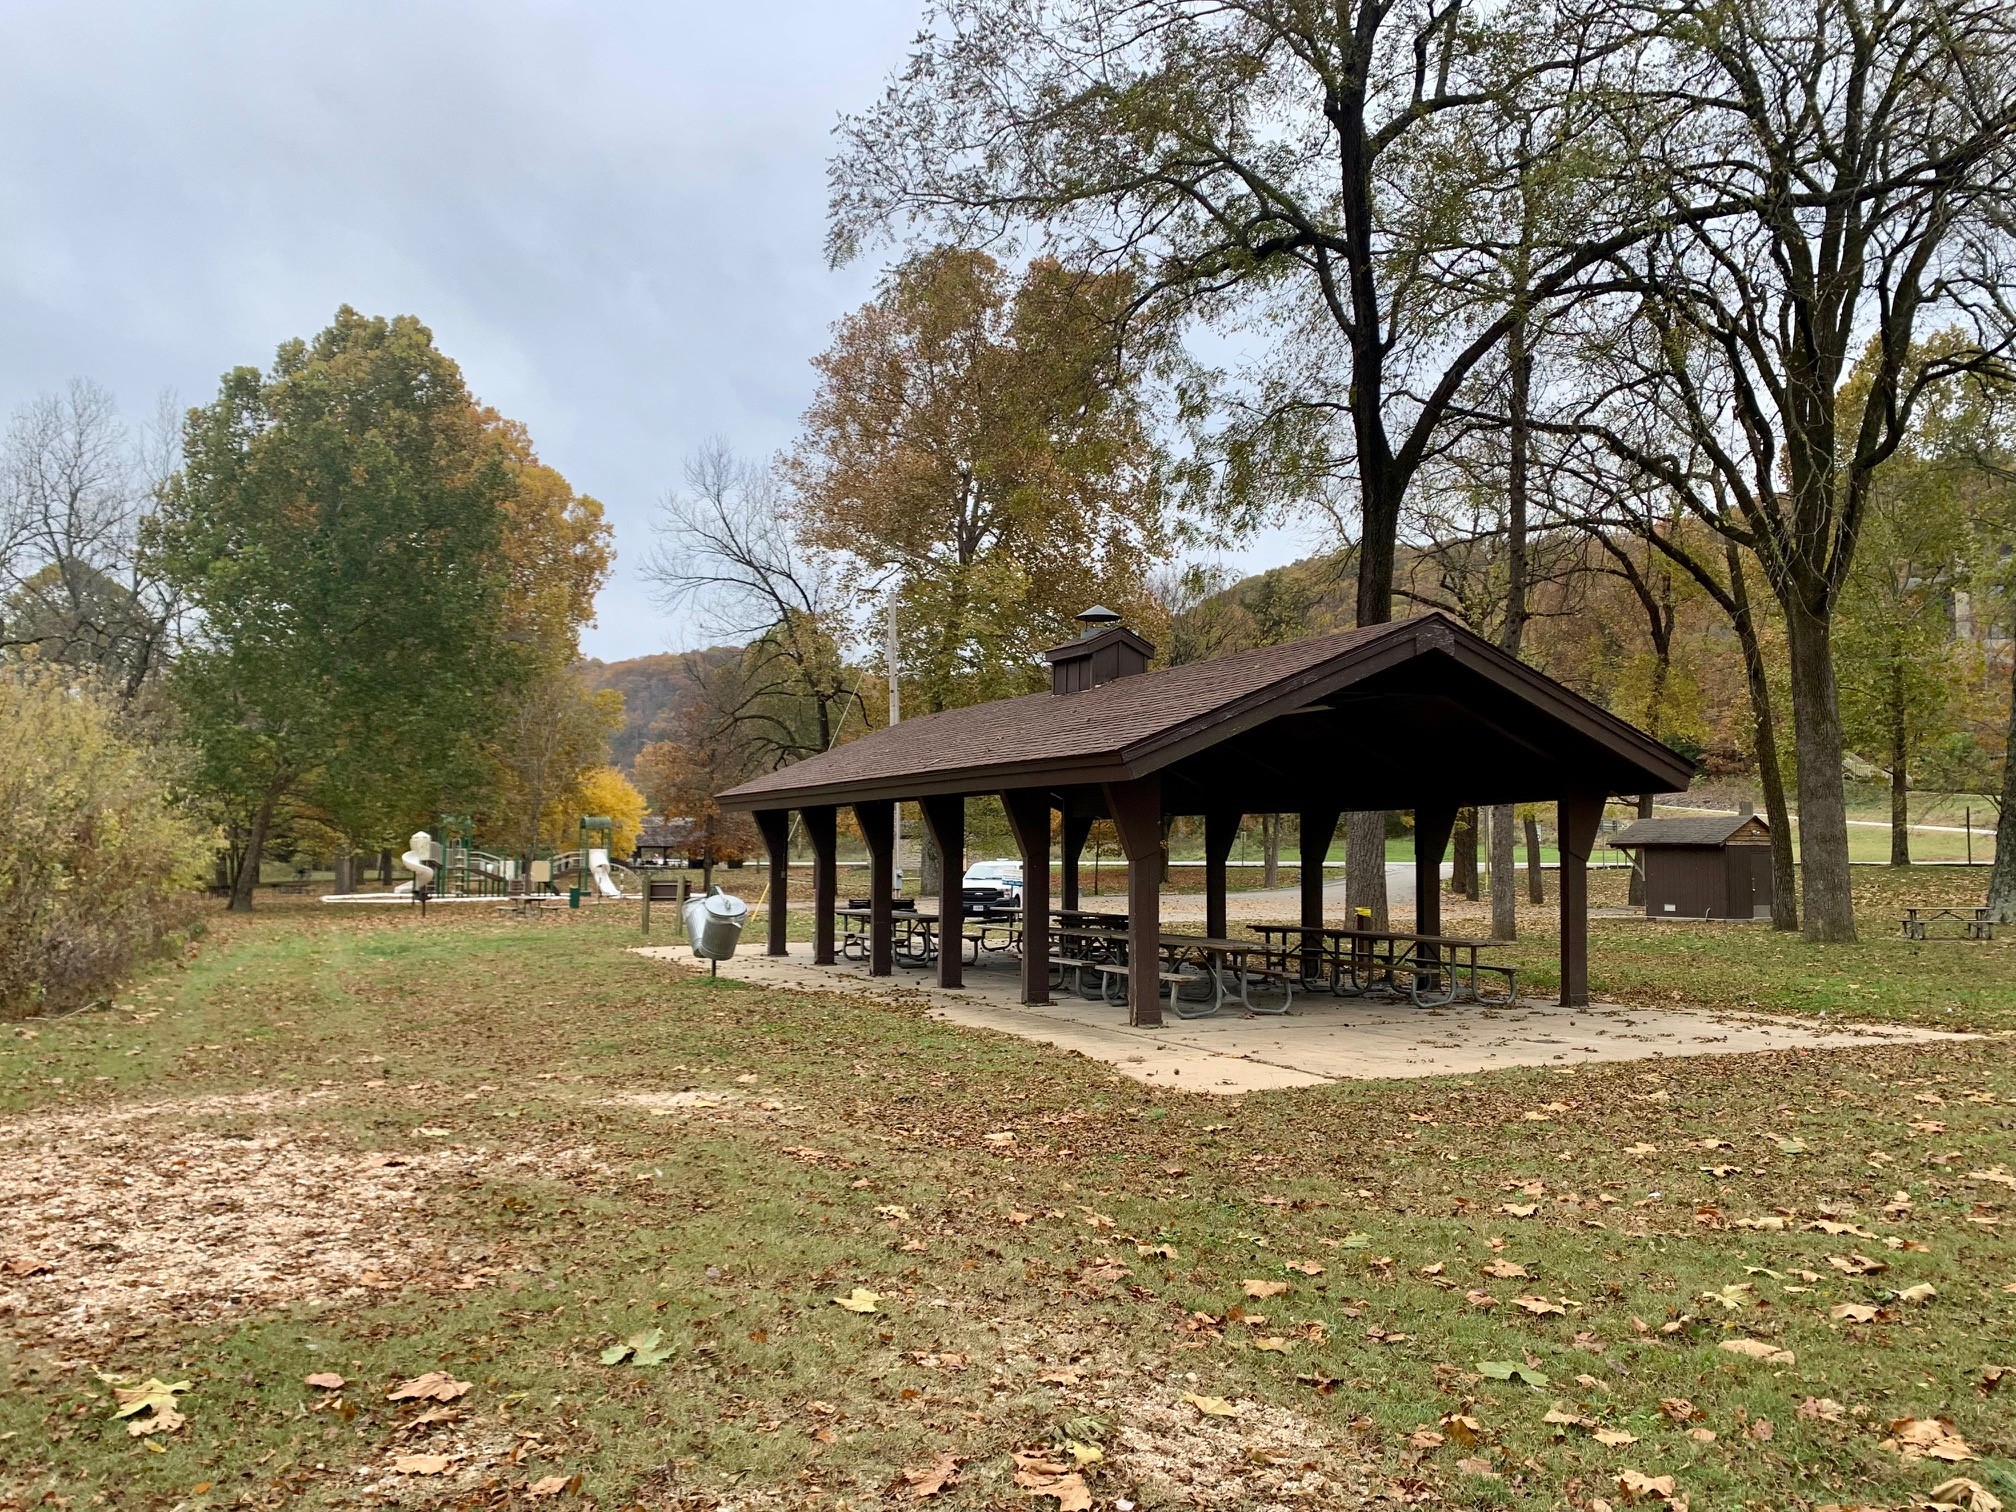 Open picnic shelter, trashcans, bathroom and playground